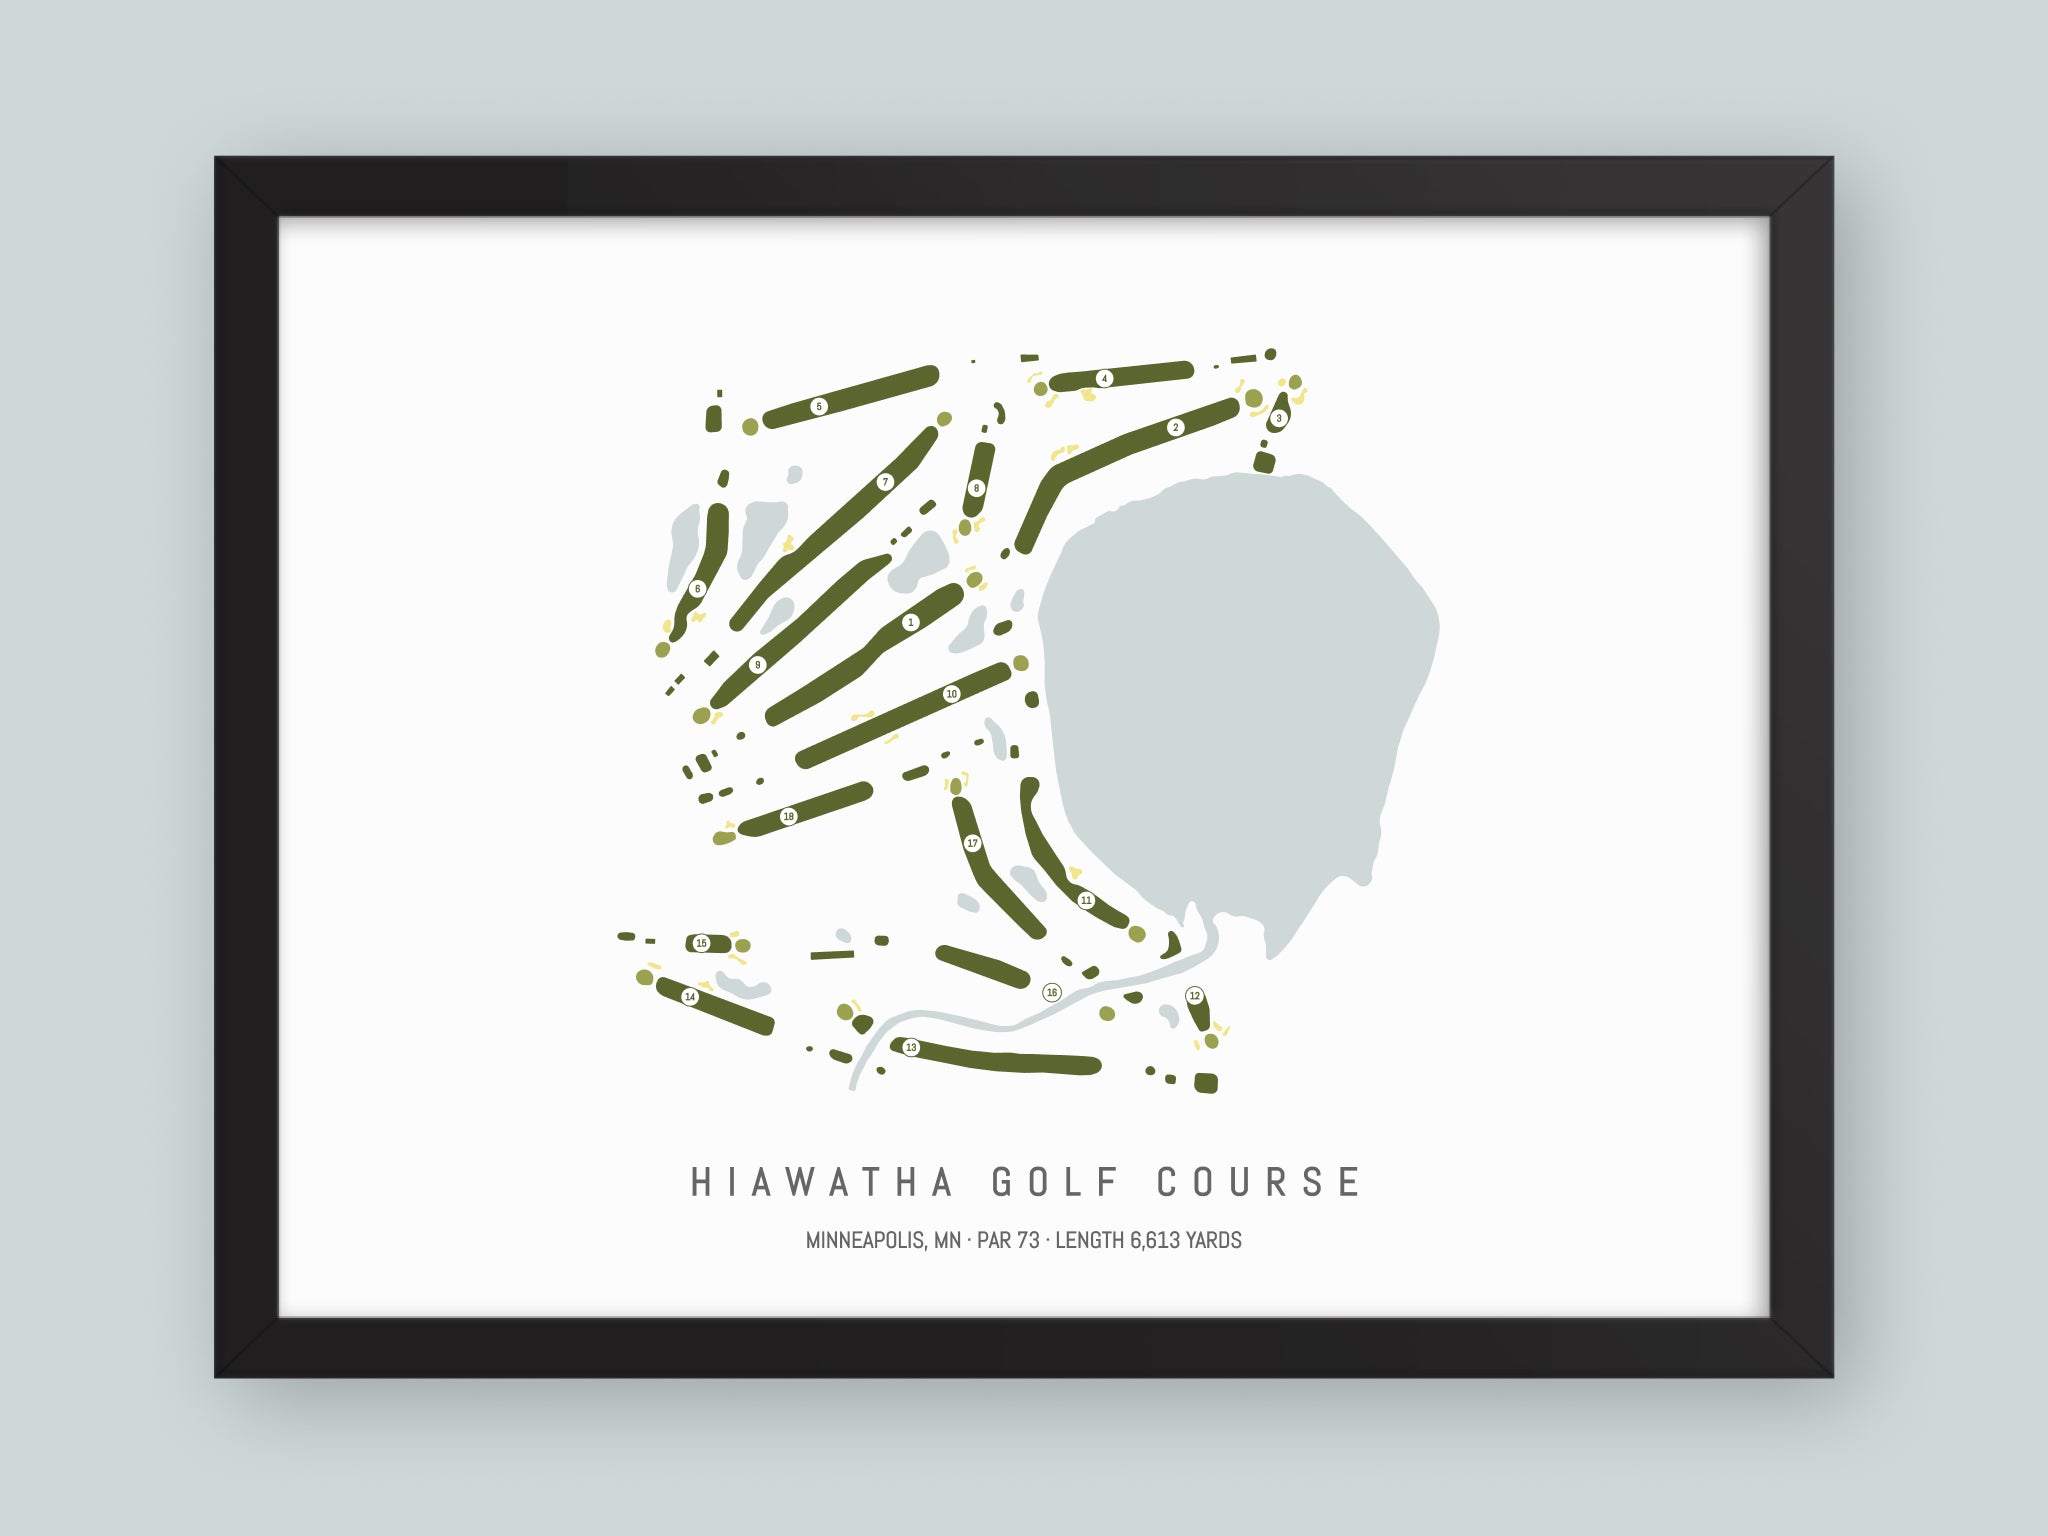 Hiawatha-Golf-Course-MN--Black-Frame-24x18-With-Hole-Numbers